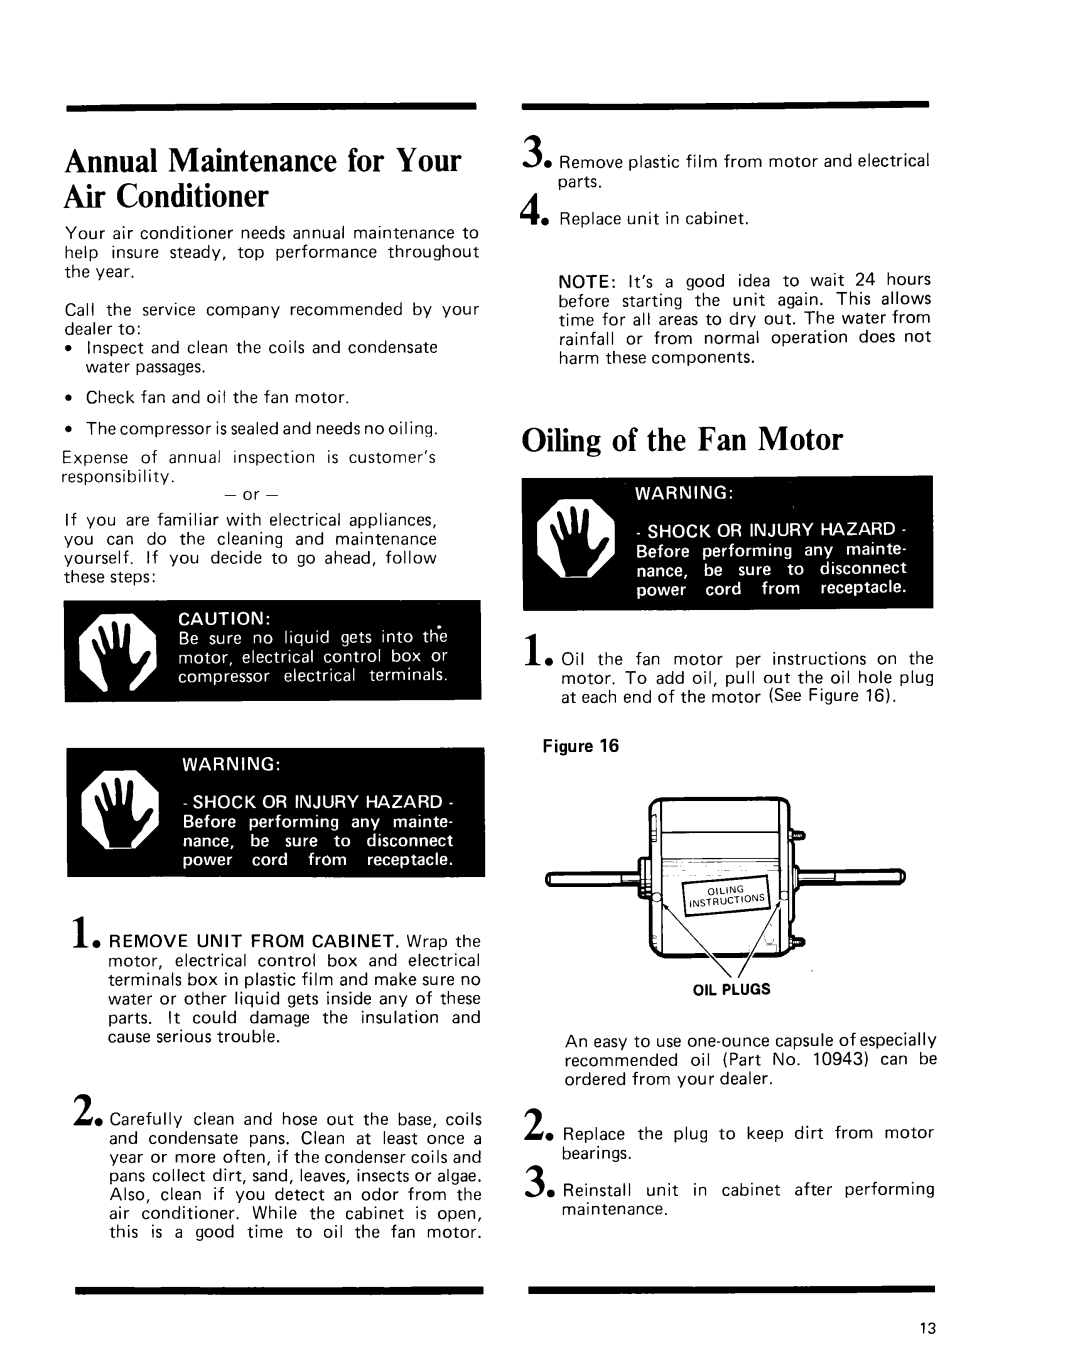 Whirlpool manual Annual Maintenance for Your Air Conditioner, Oiling of the Fan Motor 